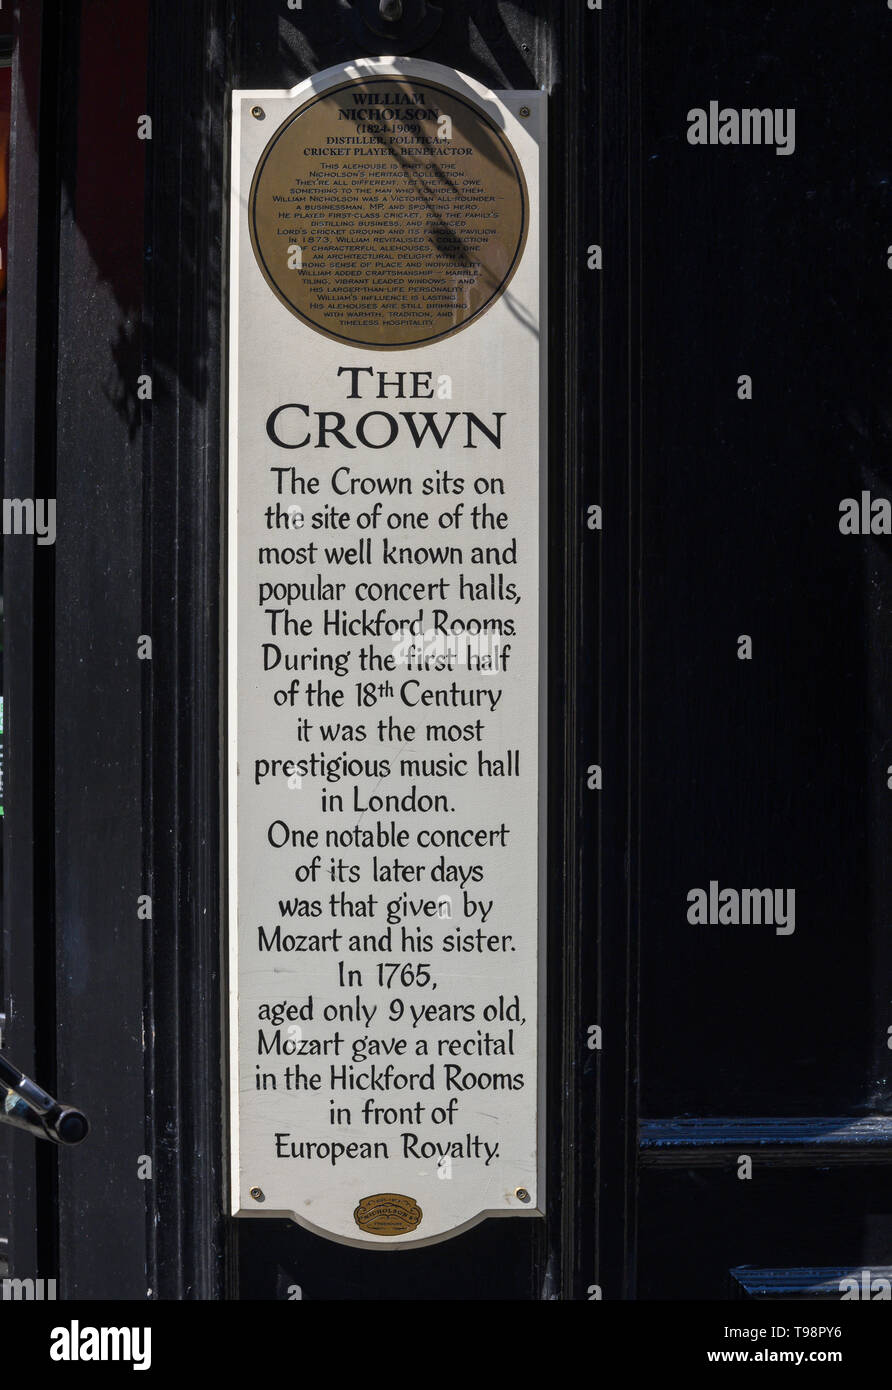 The Crown public house, Brewer Street, Soho, London, England, UK; plaque giving account of the history of the Hickford Rooms. Stock Photo